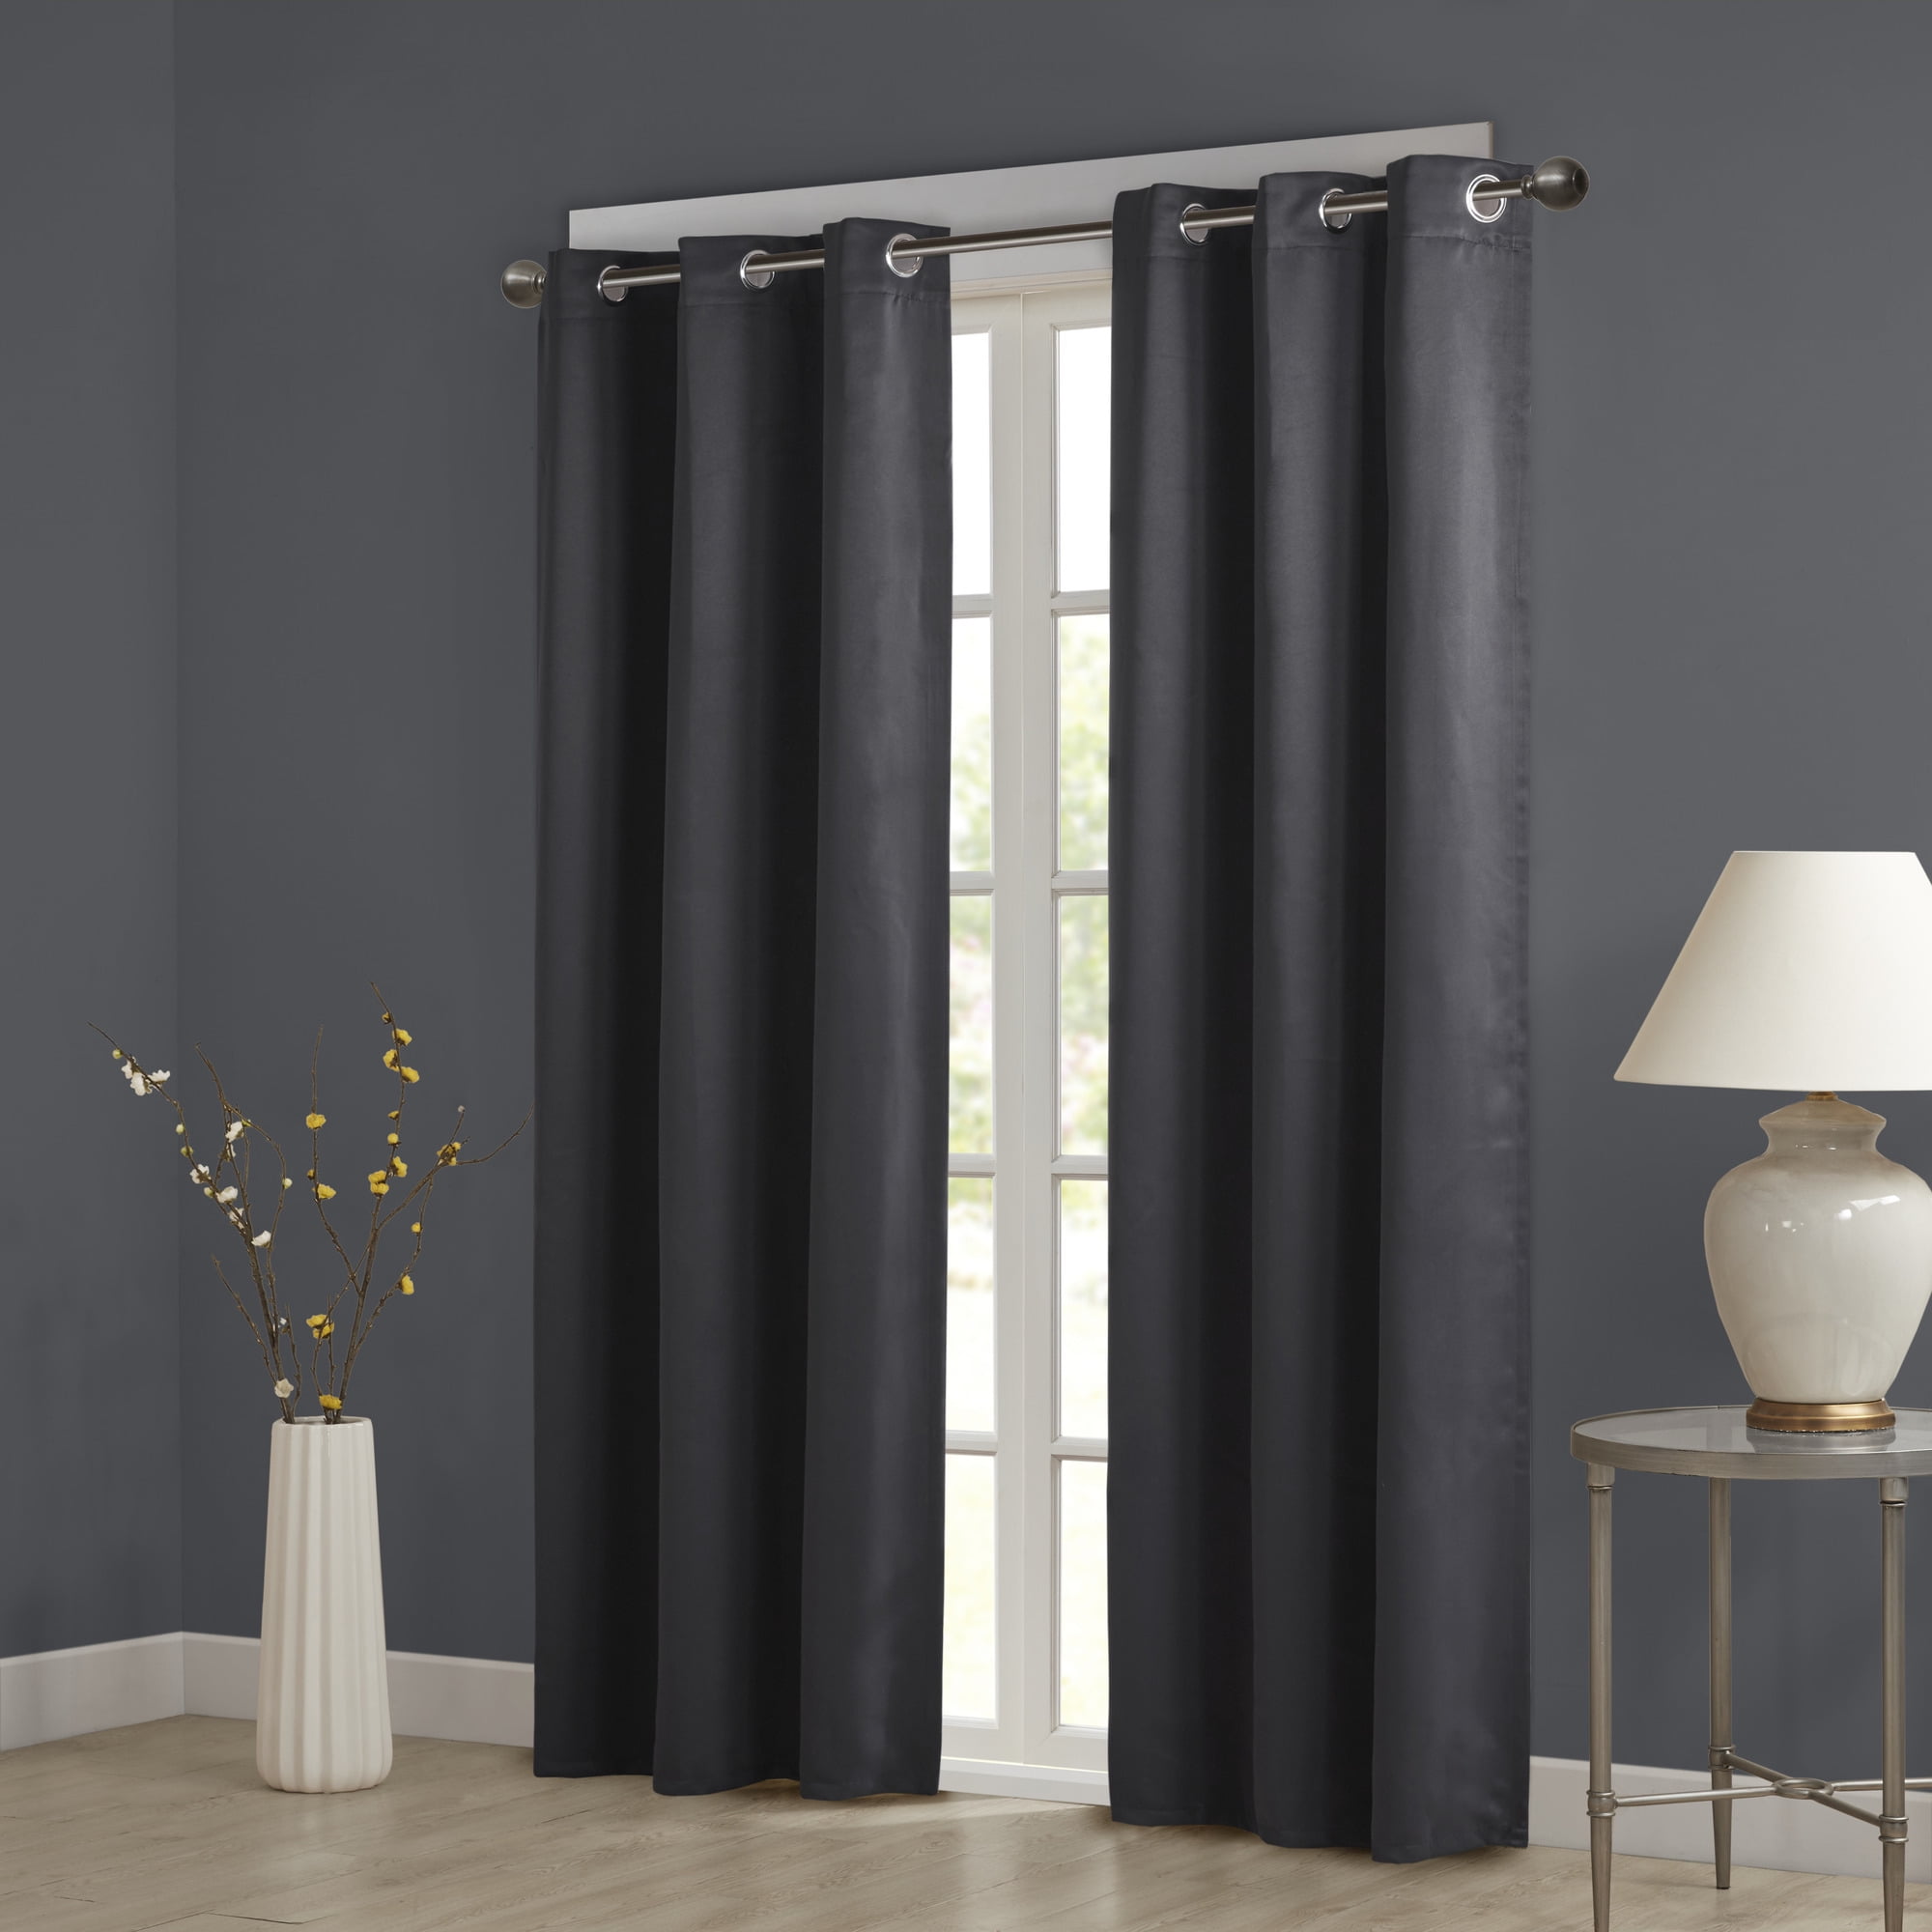 Thermal Insulated Grommet Room Darkening Blackout Curtains 42x63" Black 1 Pair 